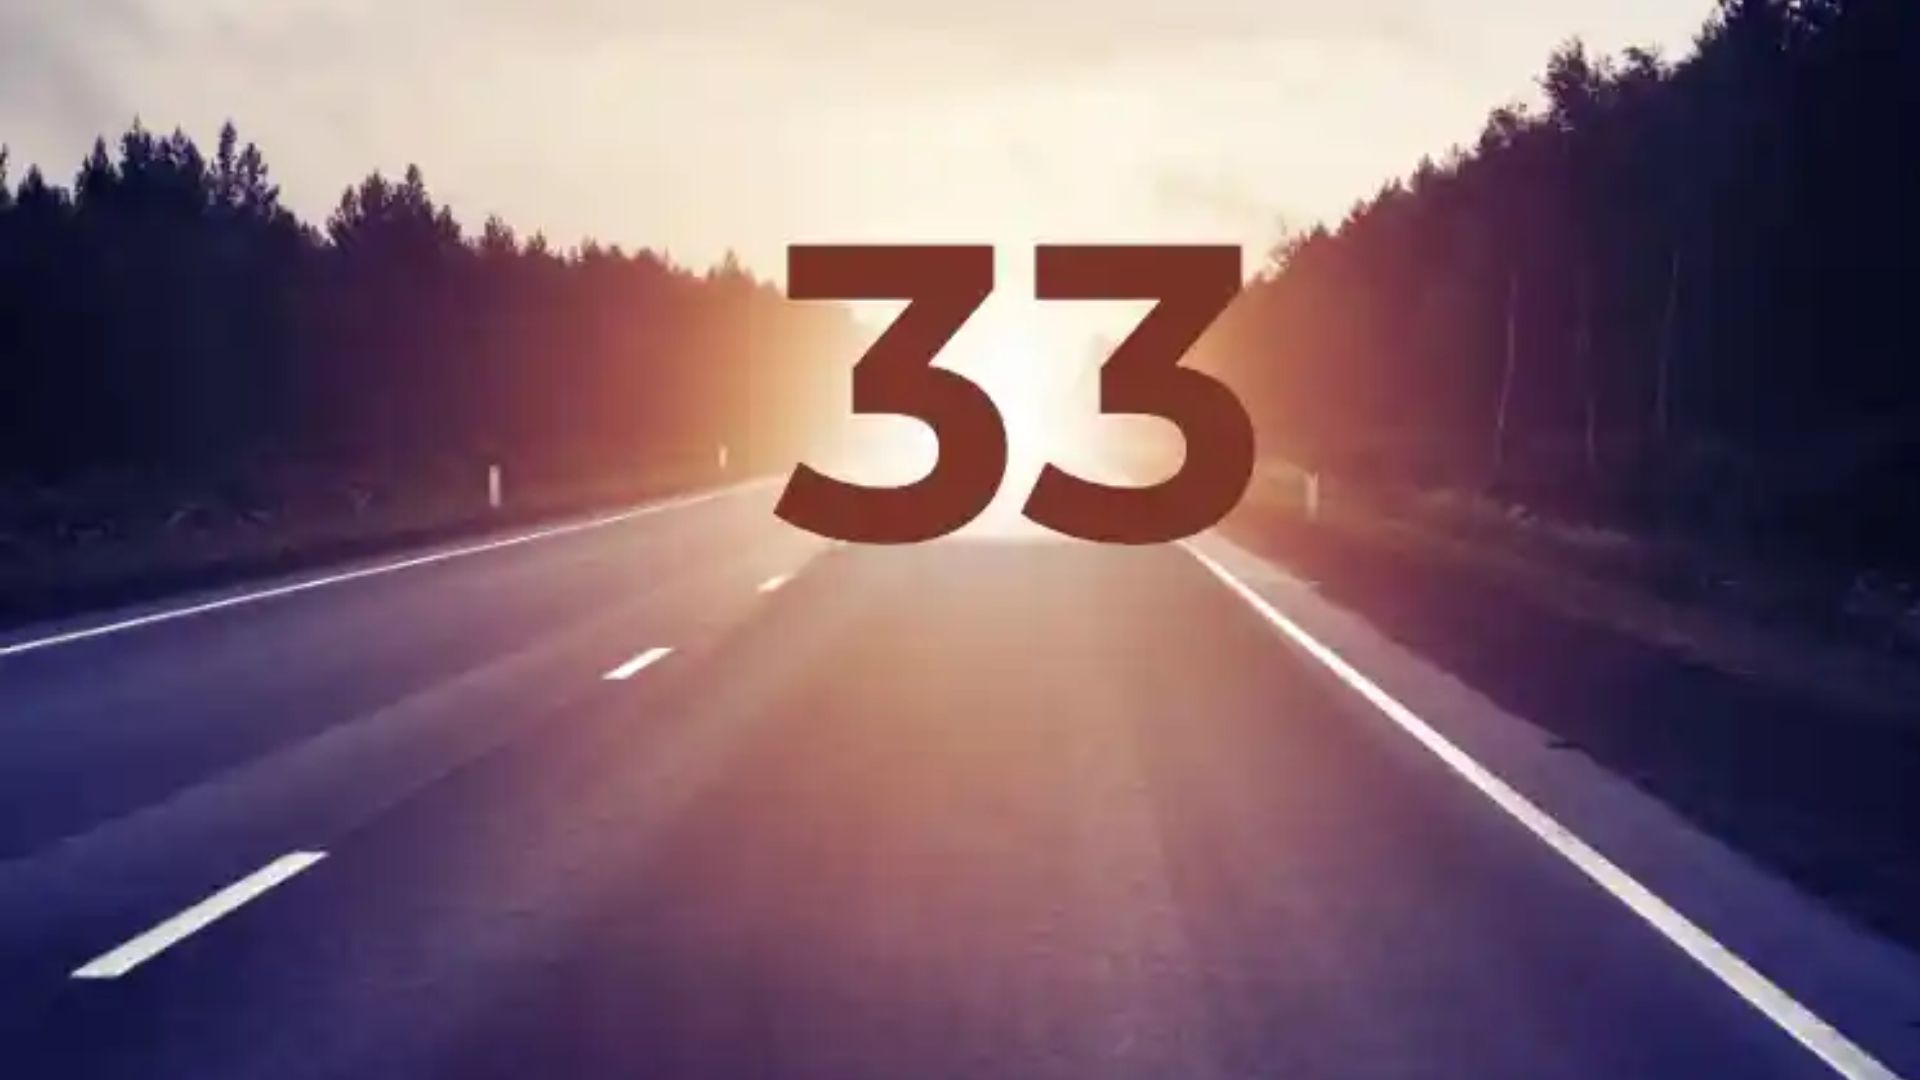 Number 33 Floating in a roadway